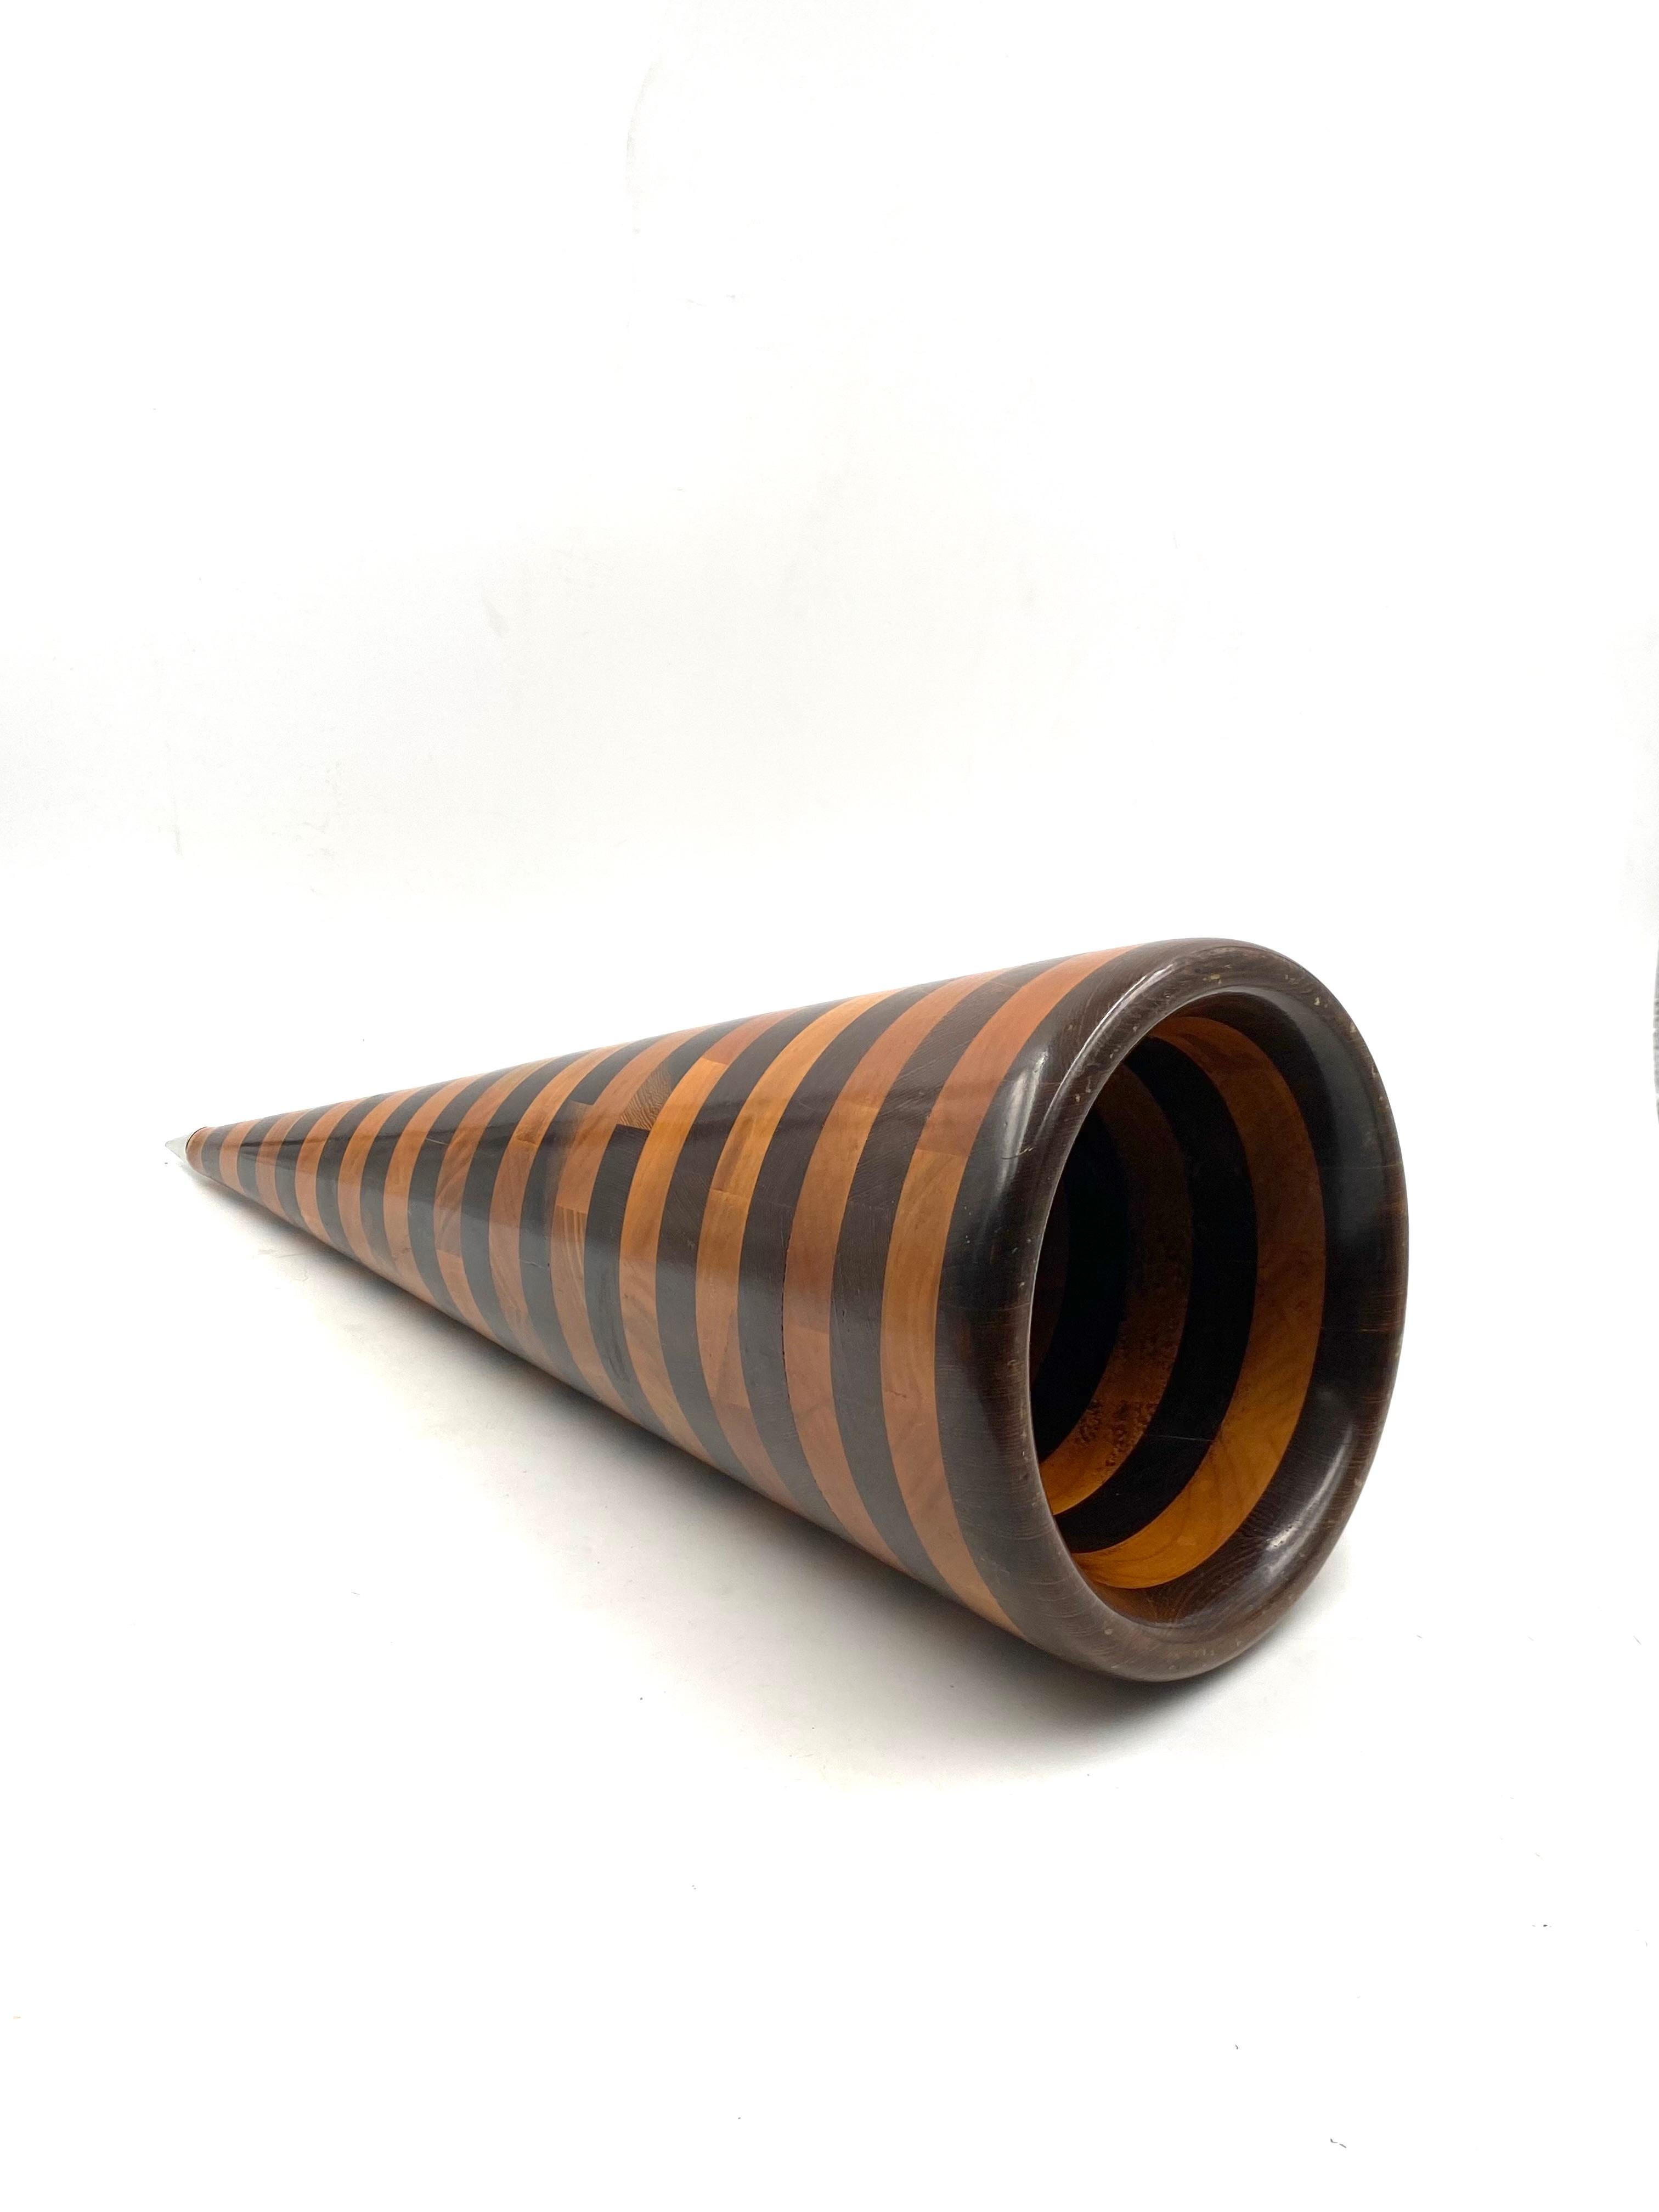 Conic Solid Wood Sculpture, Salmistraro, Italy, 1970s For Sale 4